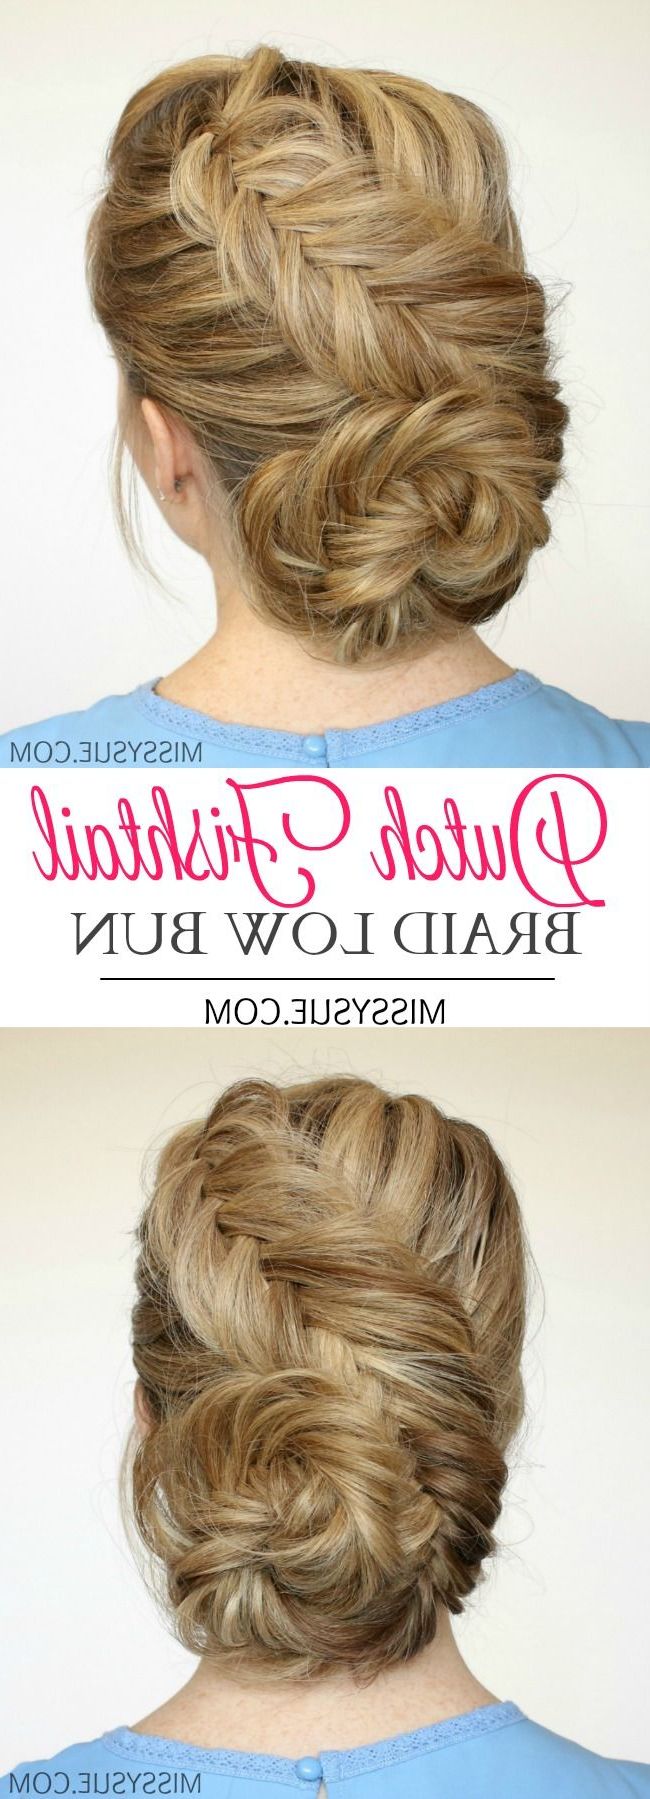 Hair Styles, Hair, Prom Intended For Well Liked Formal Dutch Fishtail Prom Updos (View 9 of 20)